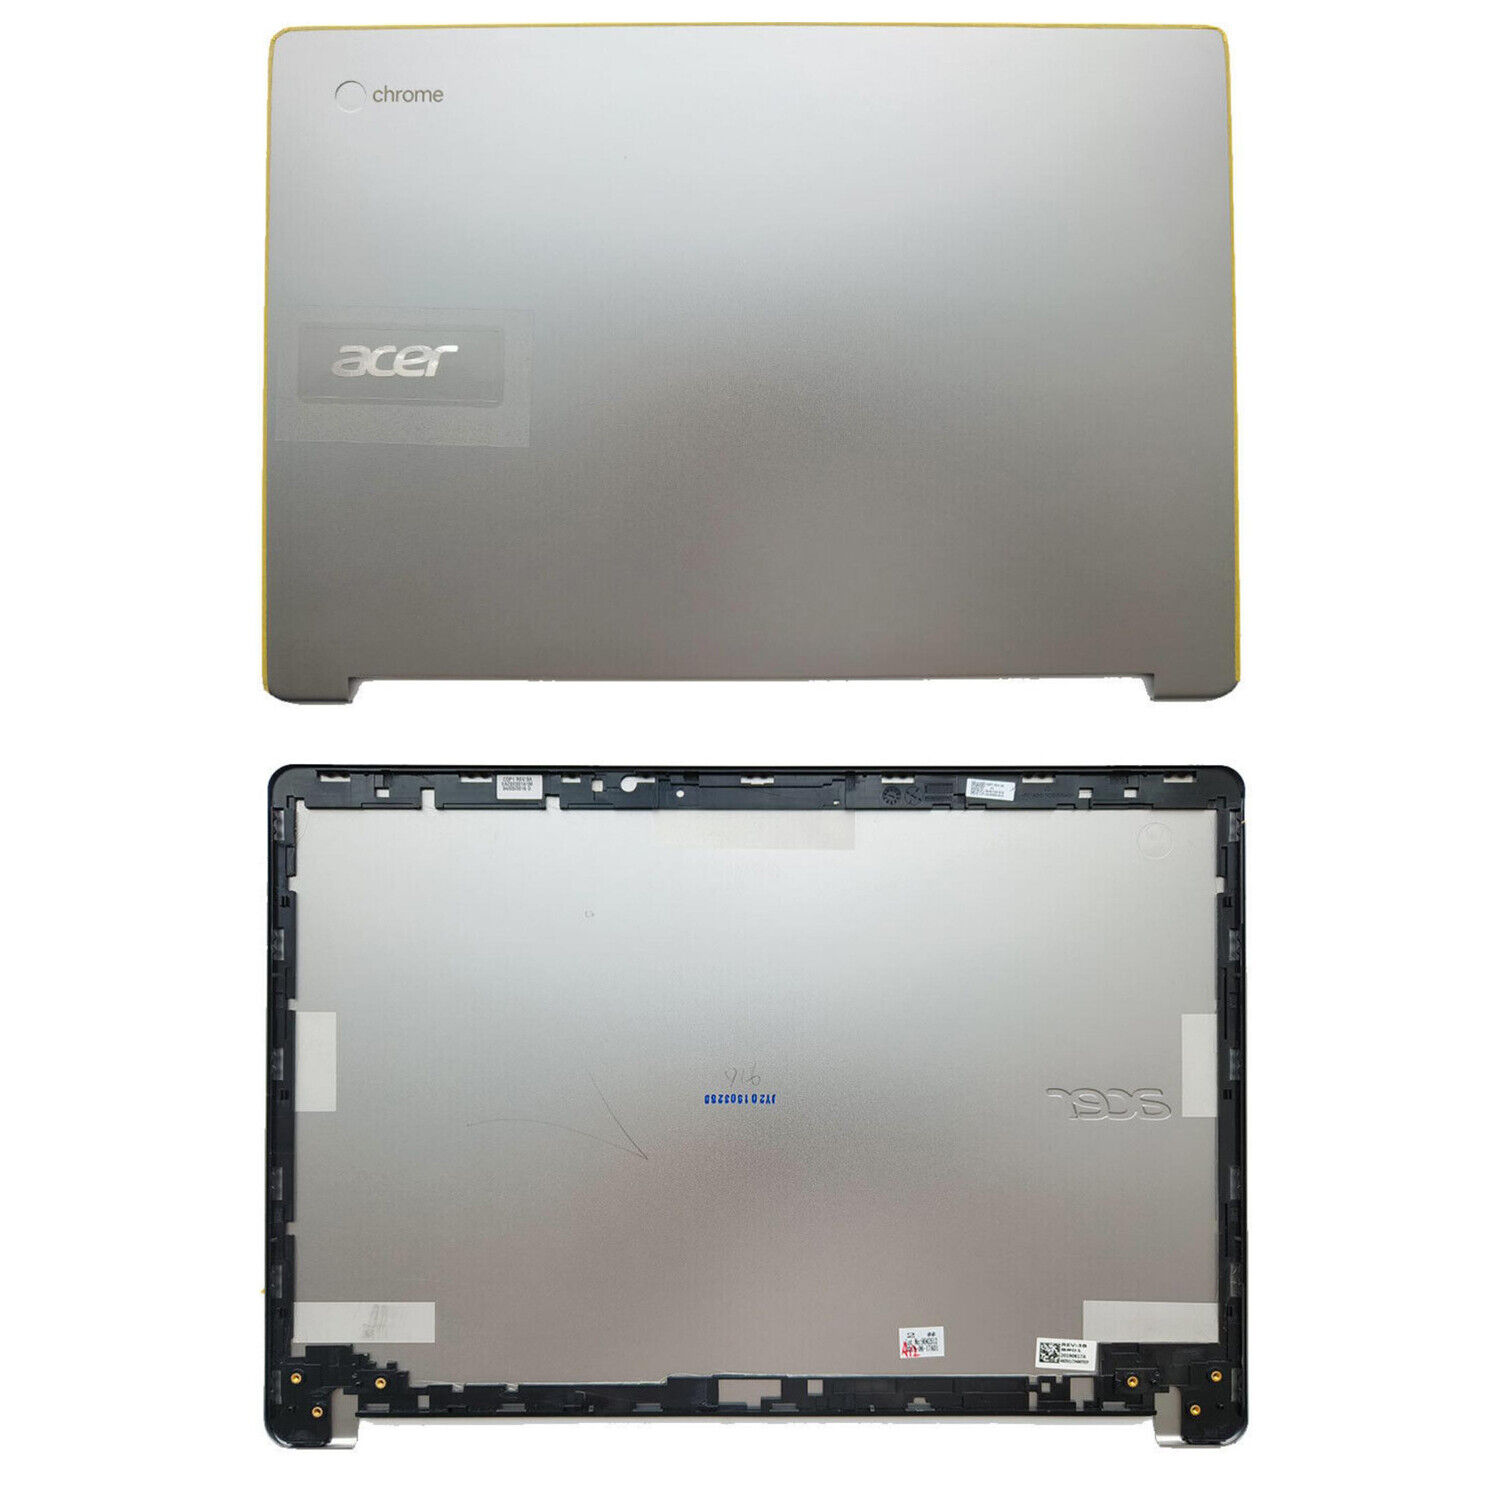 New For Acer Chromebook CB5-312T Lcd Back Cover Top Rear Lid Silver 60.GHPN7.001